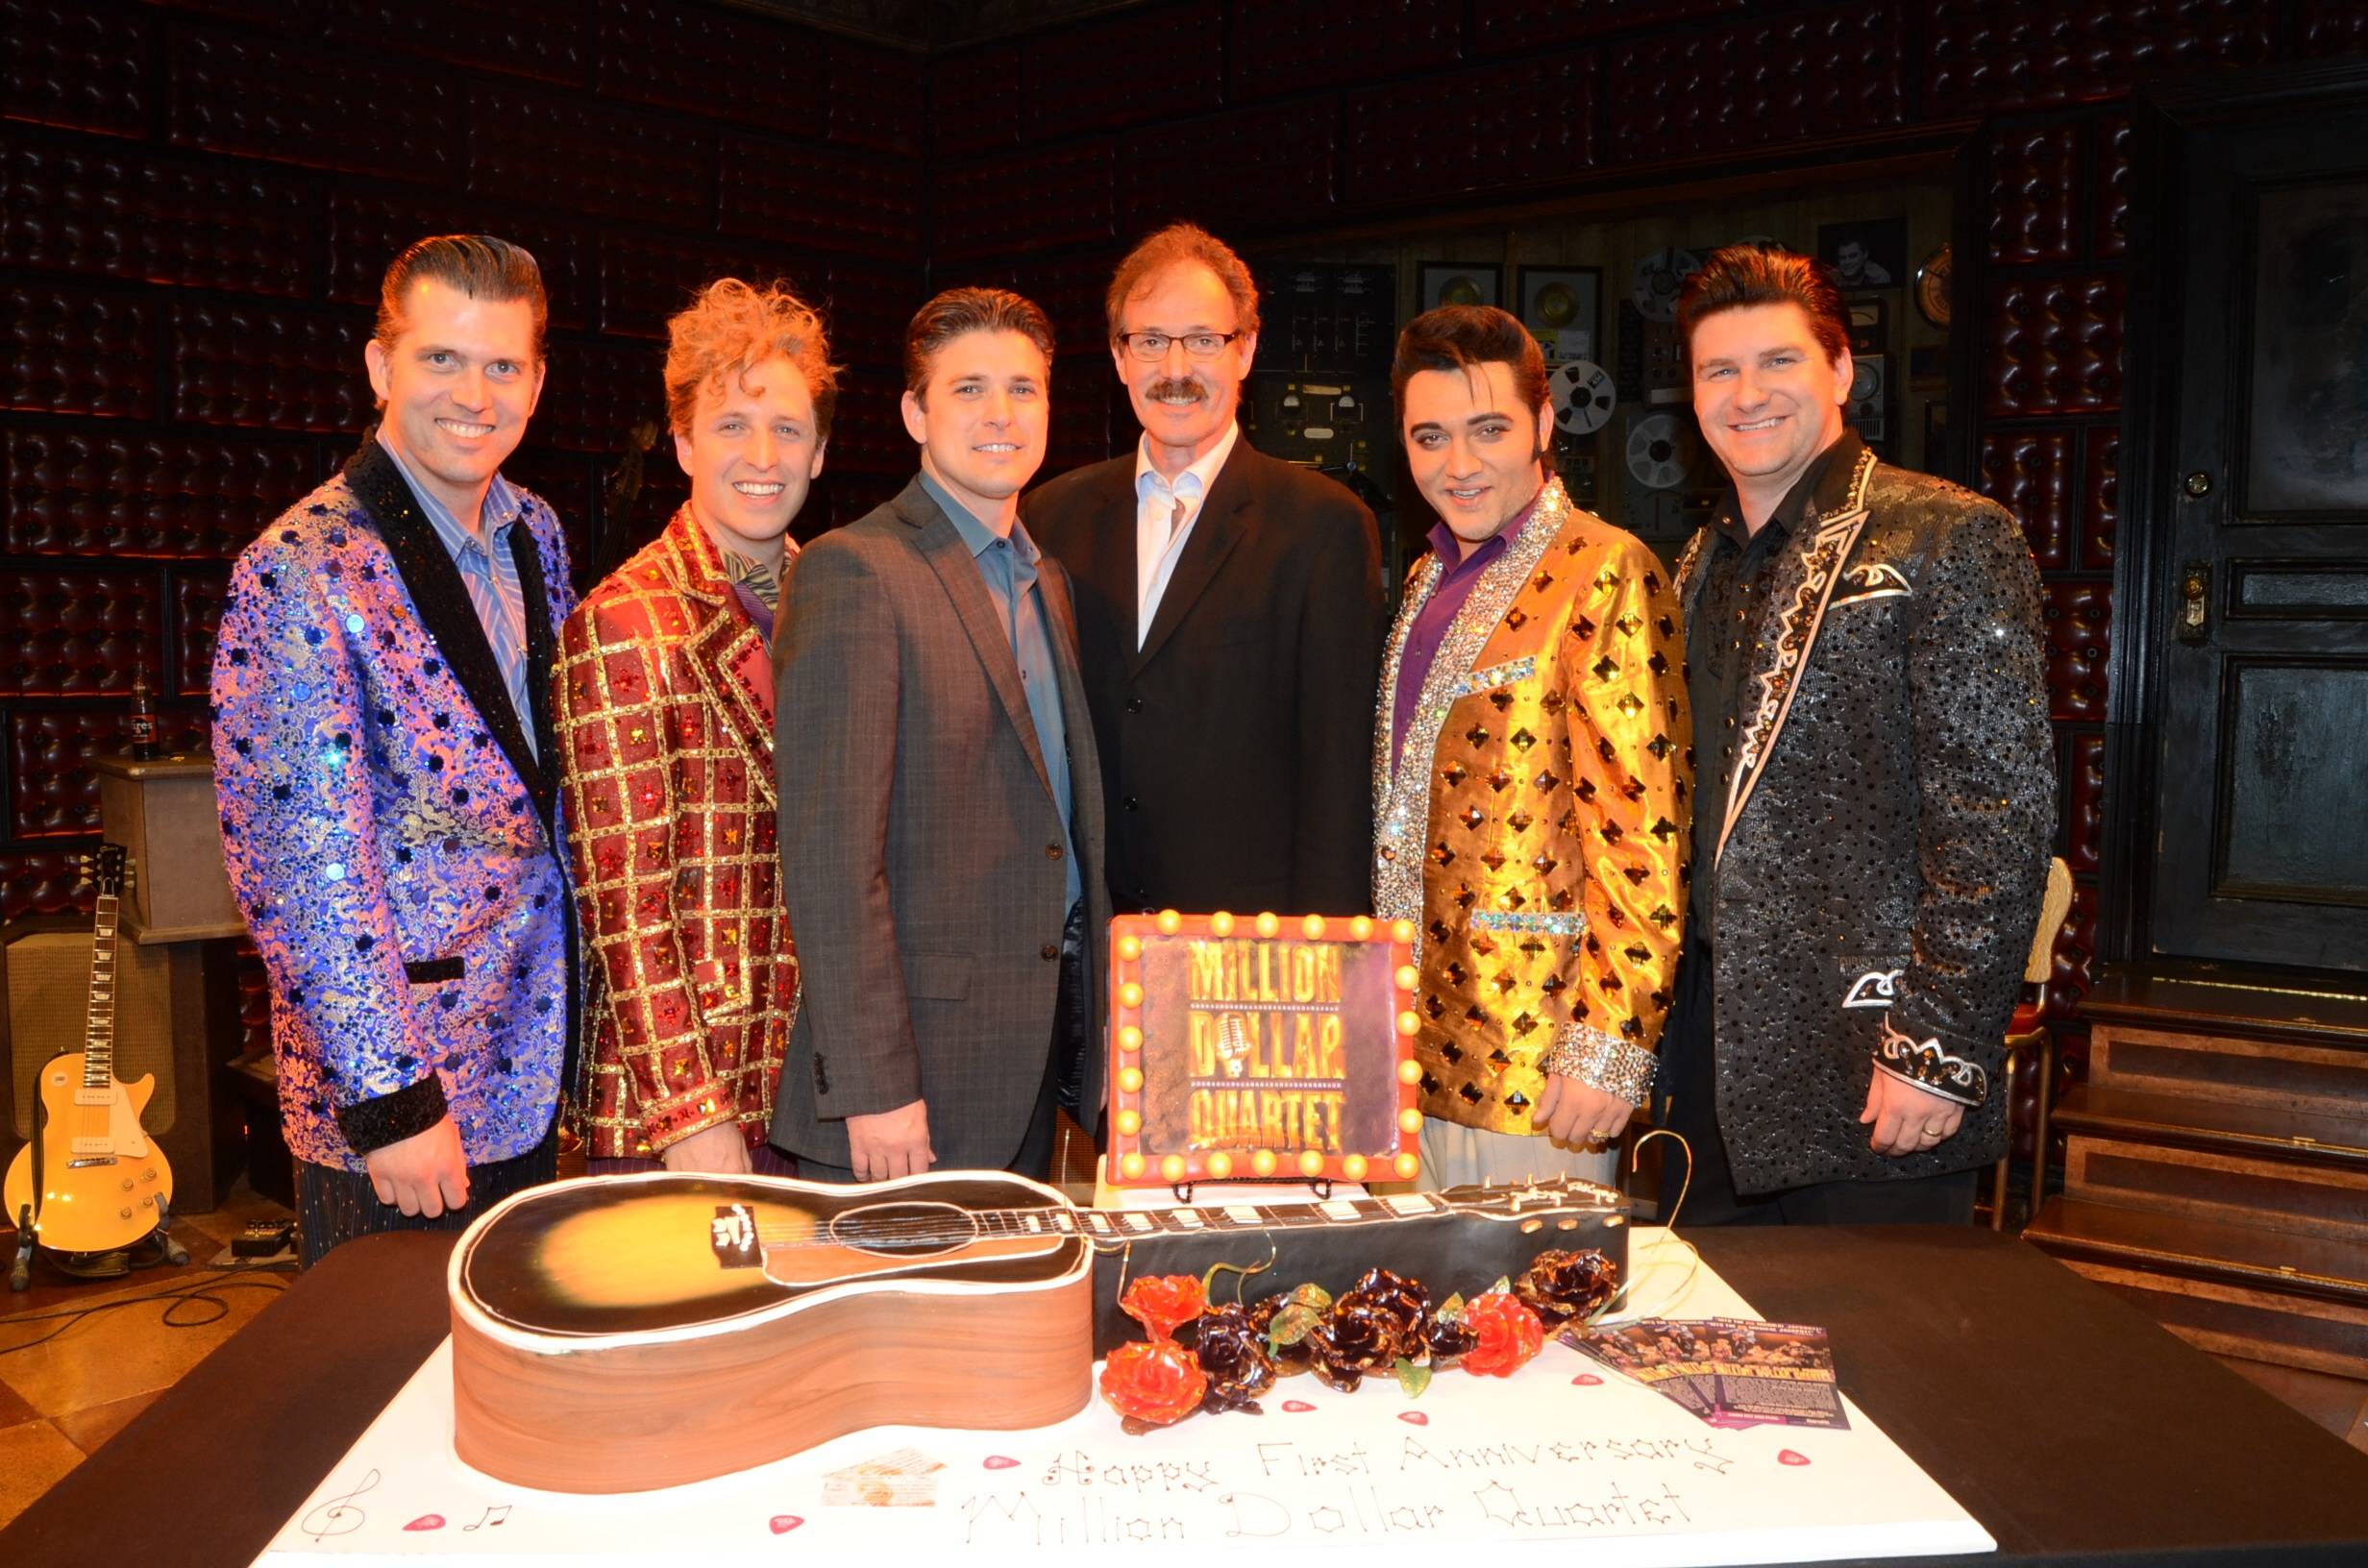 Cast of Million Dollar Quartet Las Vegas with Caesars Entertainment Executive Damian Costa and Ted Rawlins 3; First Anniversary 2.19.14 ©Caesars Entertainment